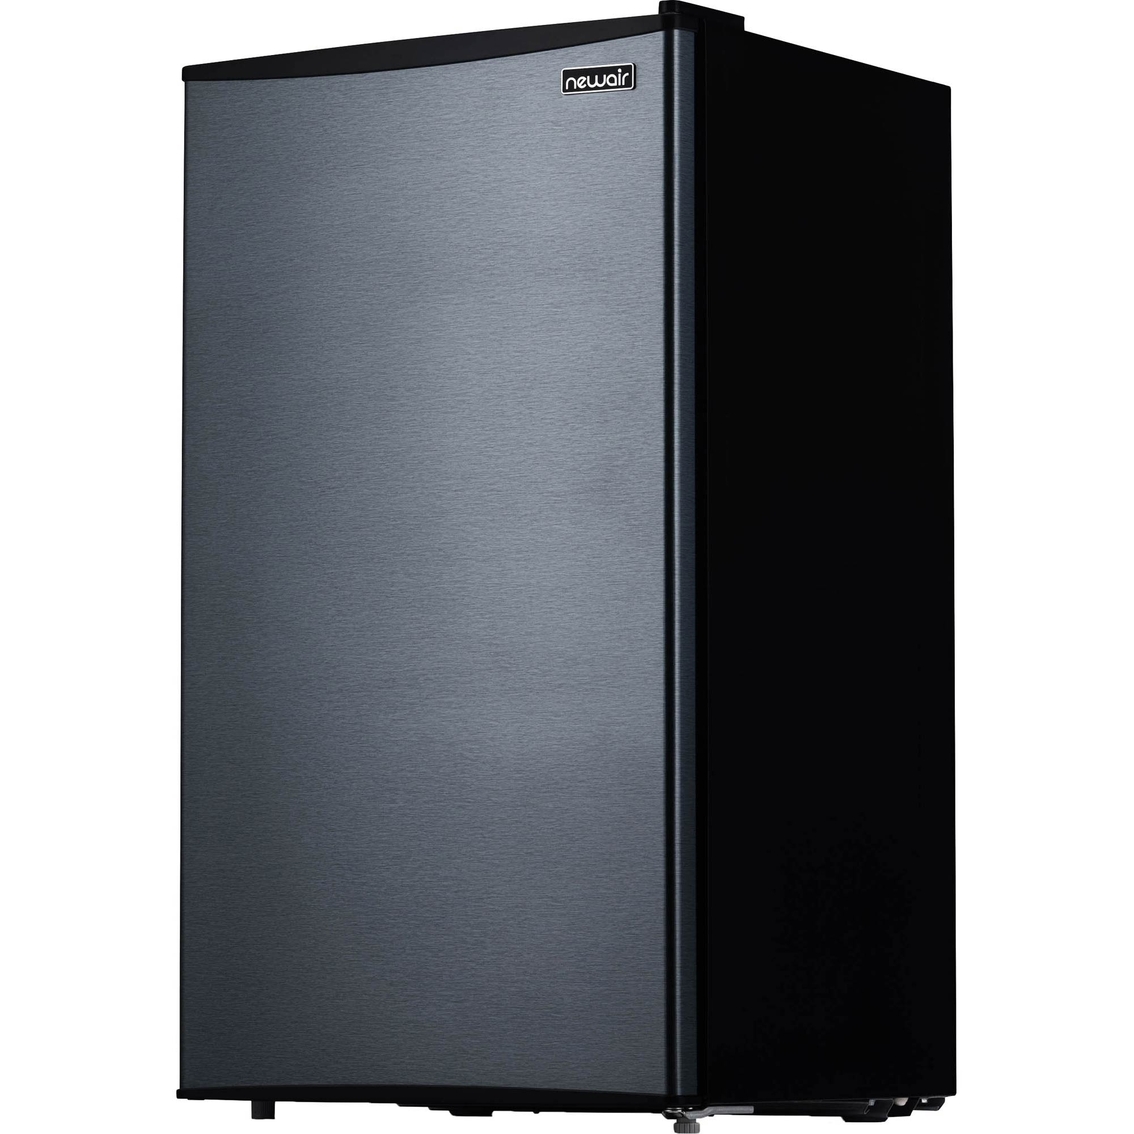 New Air LLC 3.3 cu. ft. Compact Mini Refrigerator with Freezer - Image 2 of 10